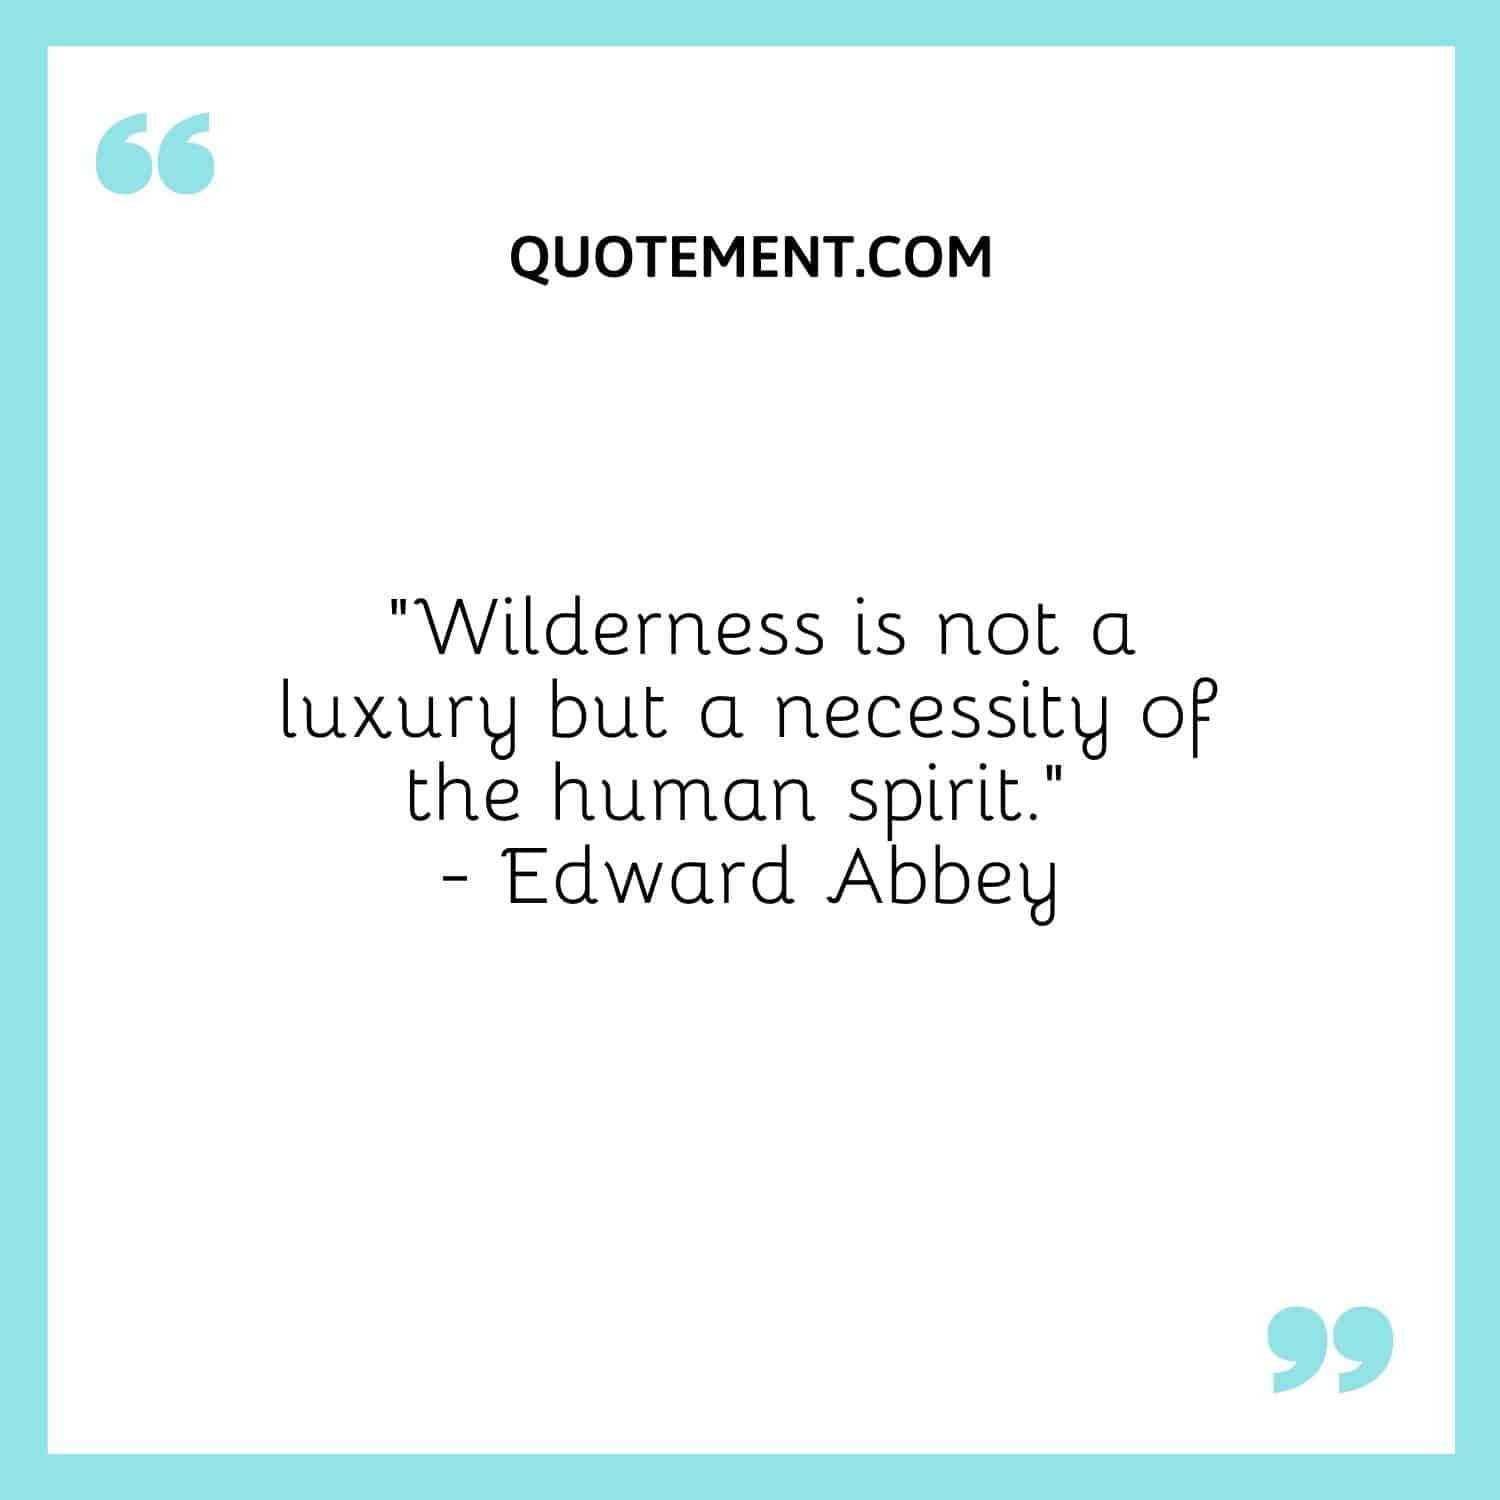 Wilderness is not a luxury but a necessity of the human spirit